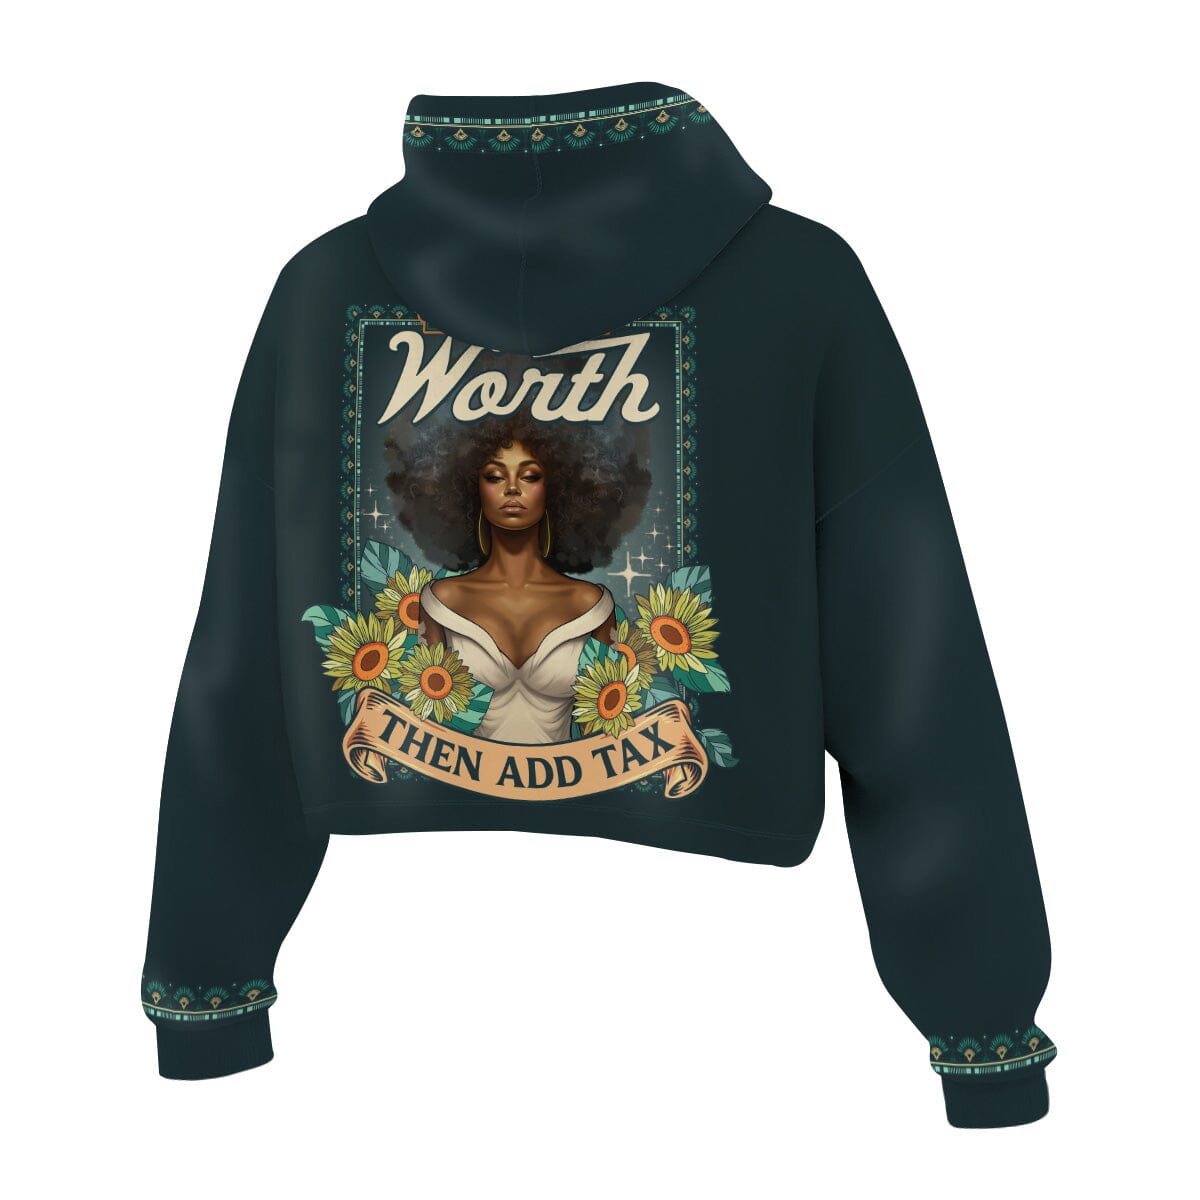 Know Your Worth Then Add Tax Cropped Hoodie Cropped Hoodie Zootop Bear 